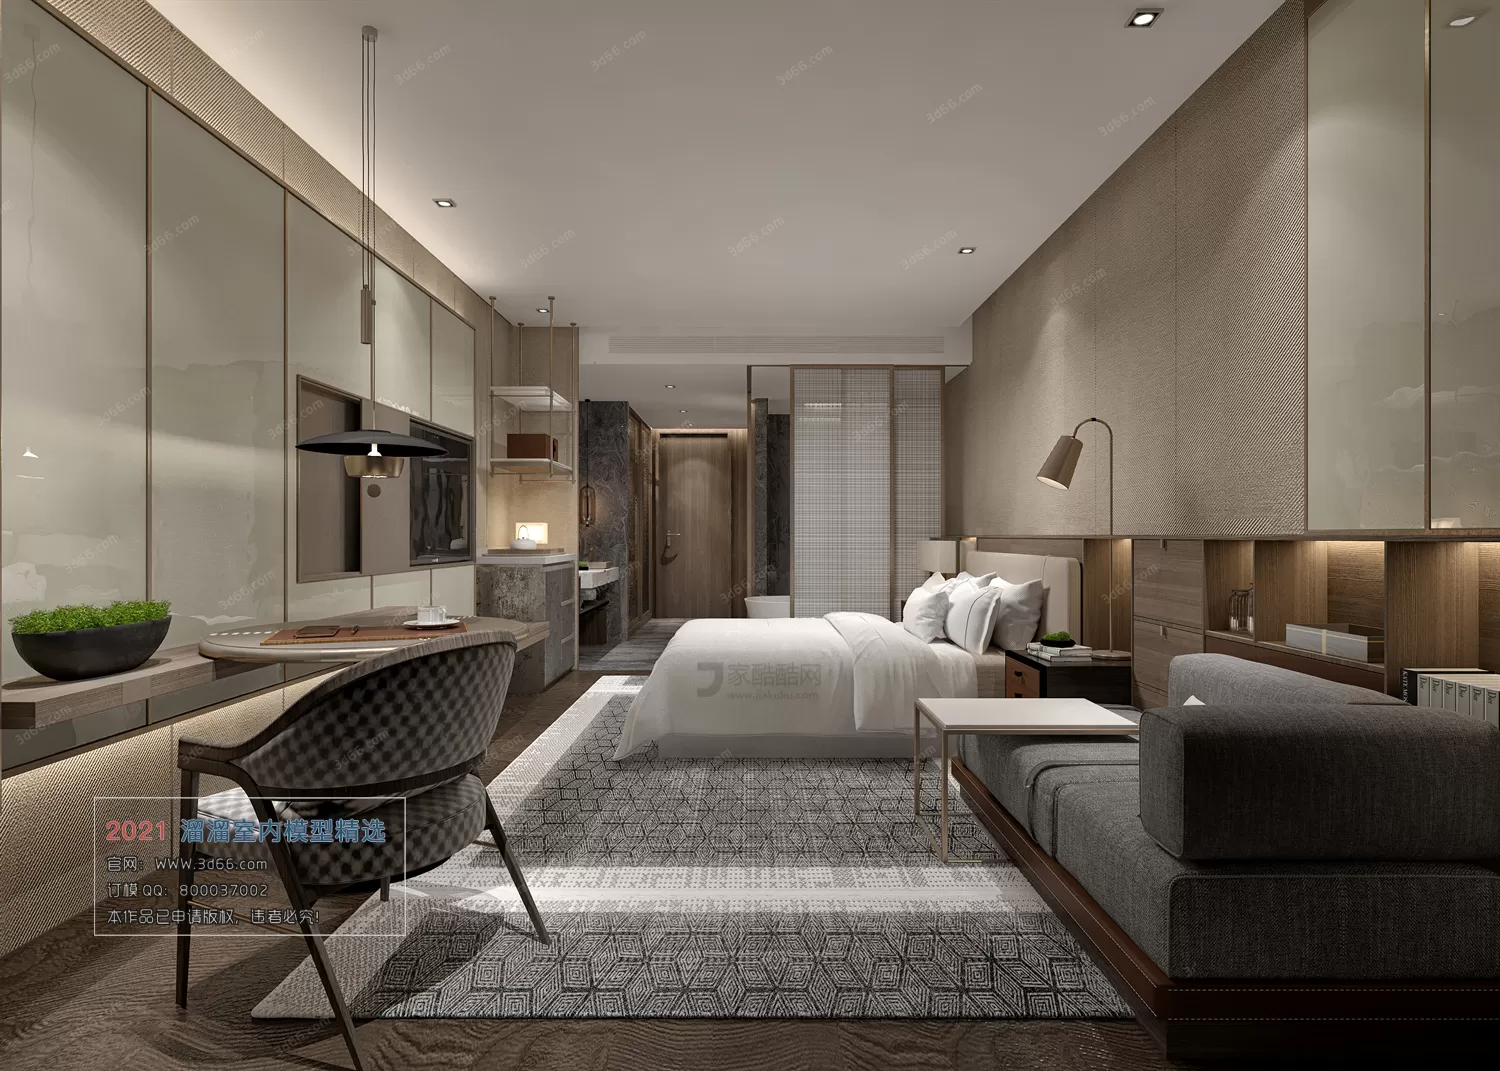 HOTEL SUITE – A006-Modern style-Vray model